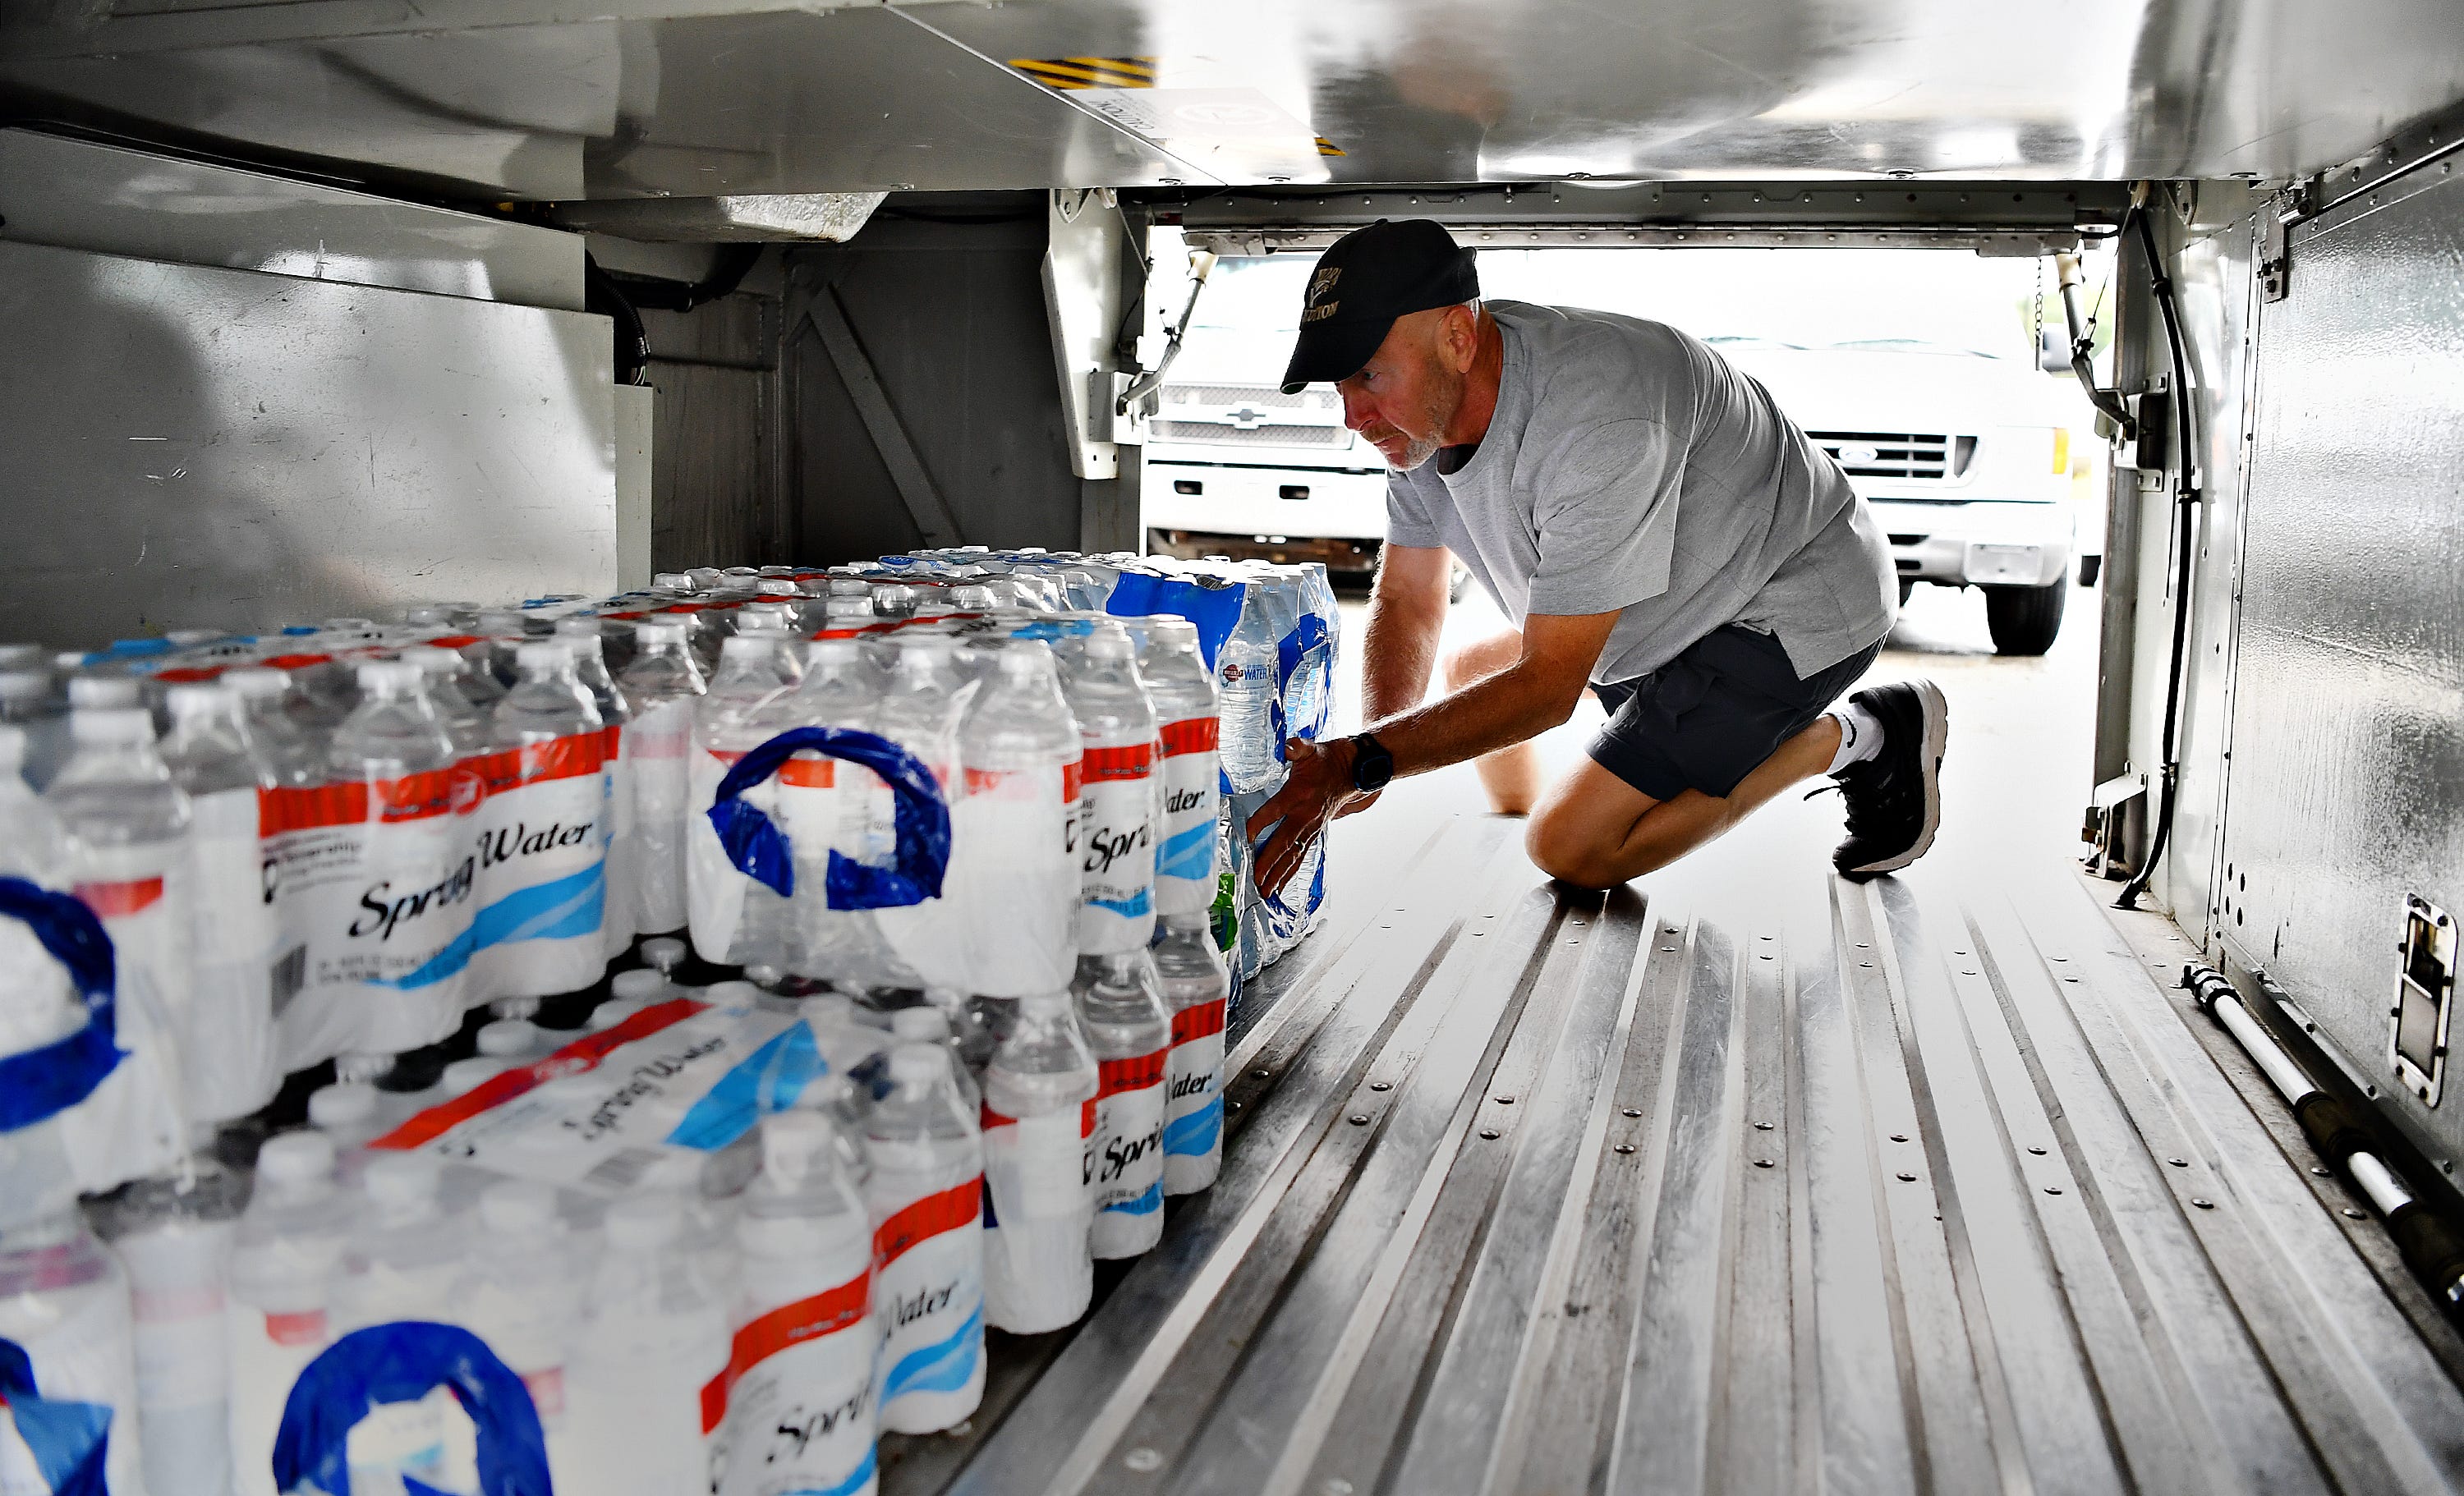 Volunteer Don Reichard, of West Manchester Township, works with other volunteers and employees to collect and load donations of non-perishable items and toiletries at Bailey Coach in West Manchester Township, Tuesday, Sept. 11, 2018. The items will be delivered to areas that are projected to be in the path of Hurricane Florence. Dawn J. Sagert photo